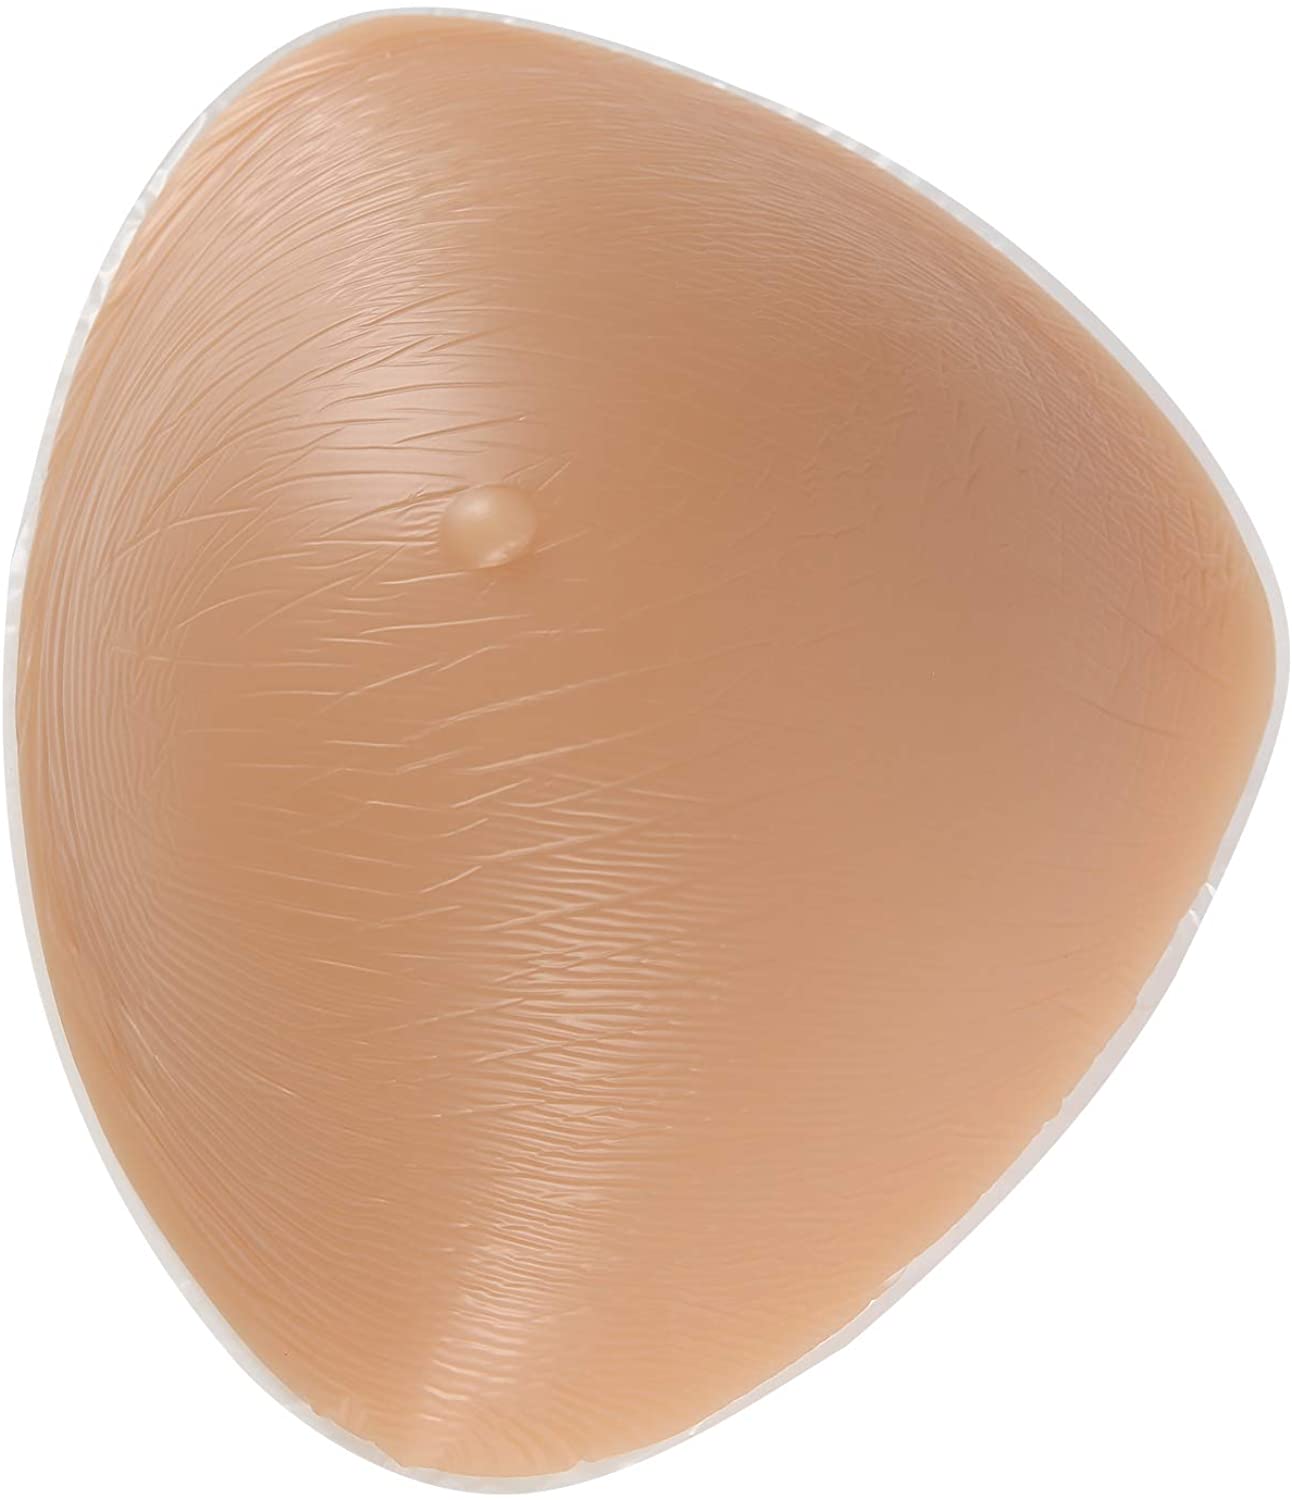 ivita-silicone-breast-forms-for-crossdressers-suntan-size-c-cup-550g